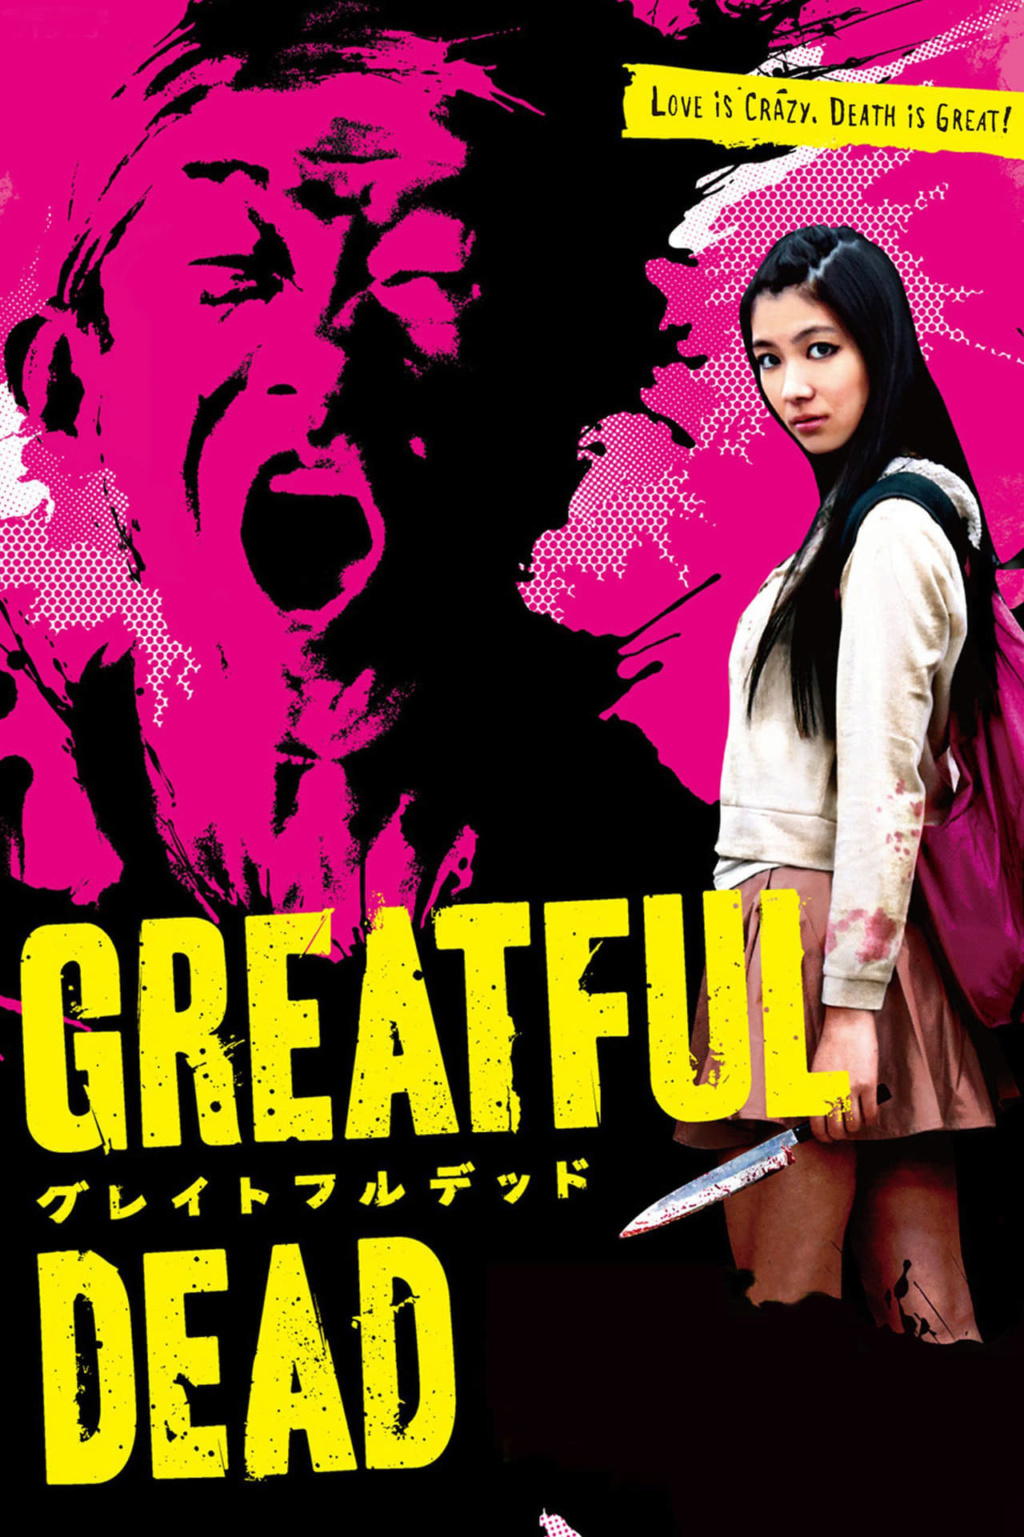 Greatful Dead - VOSTFR 1080p HDLight